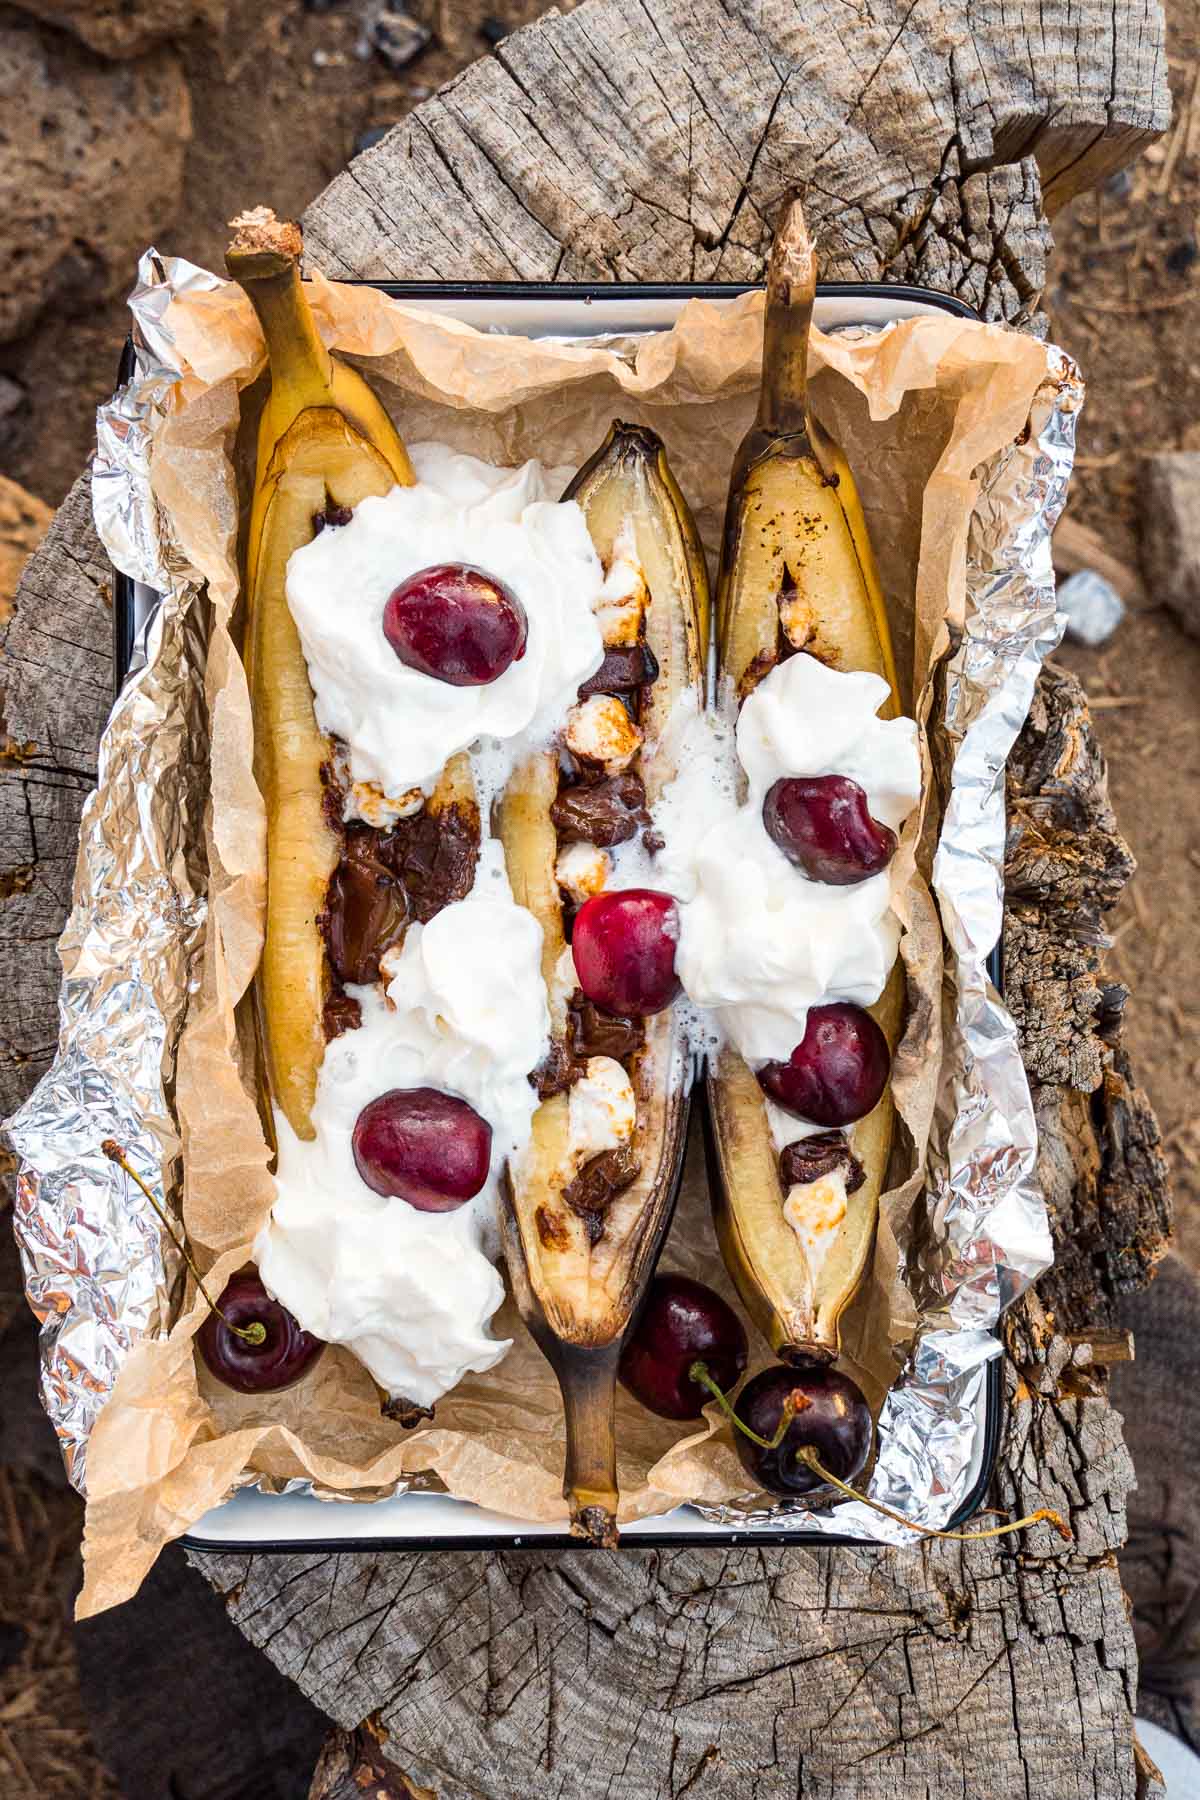 Bonfire banana split topped with whipped cream in a serving dish on a log